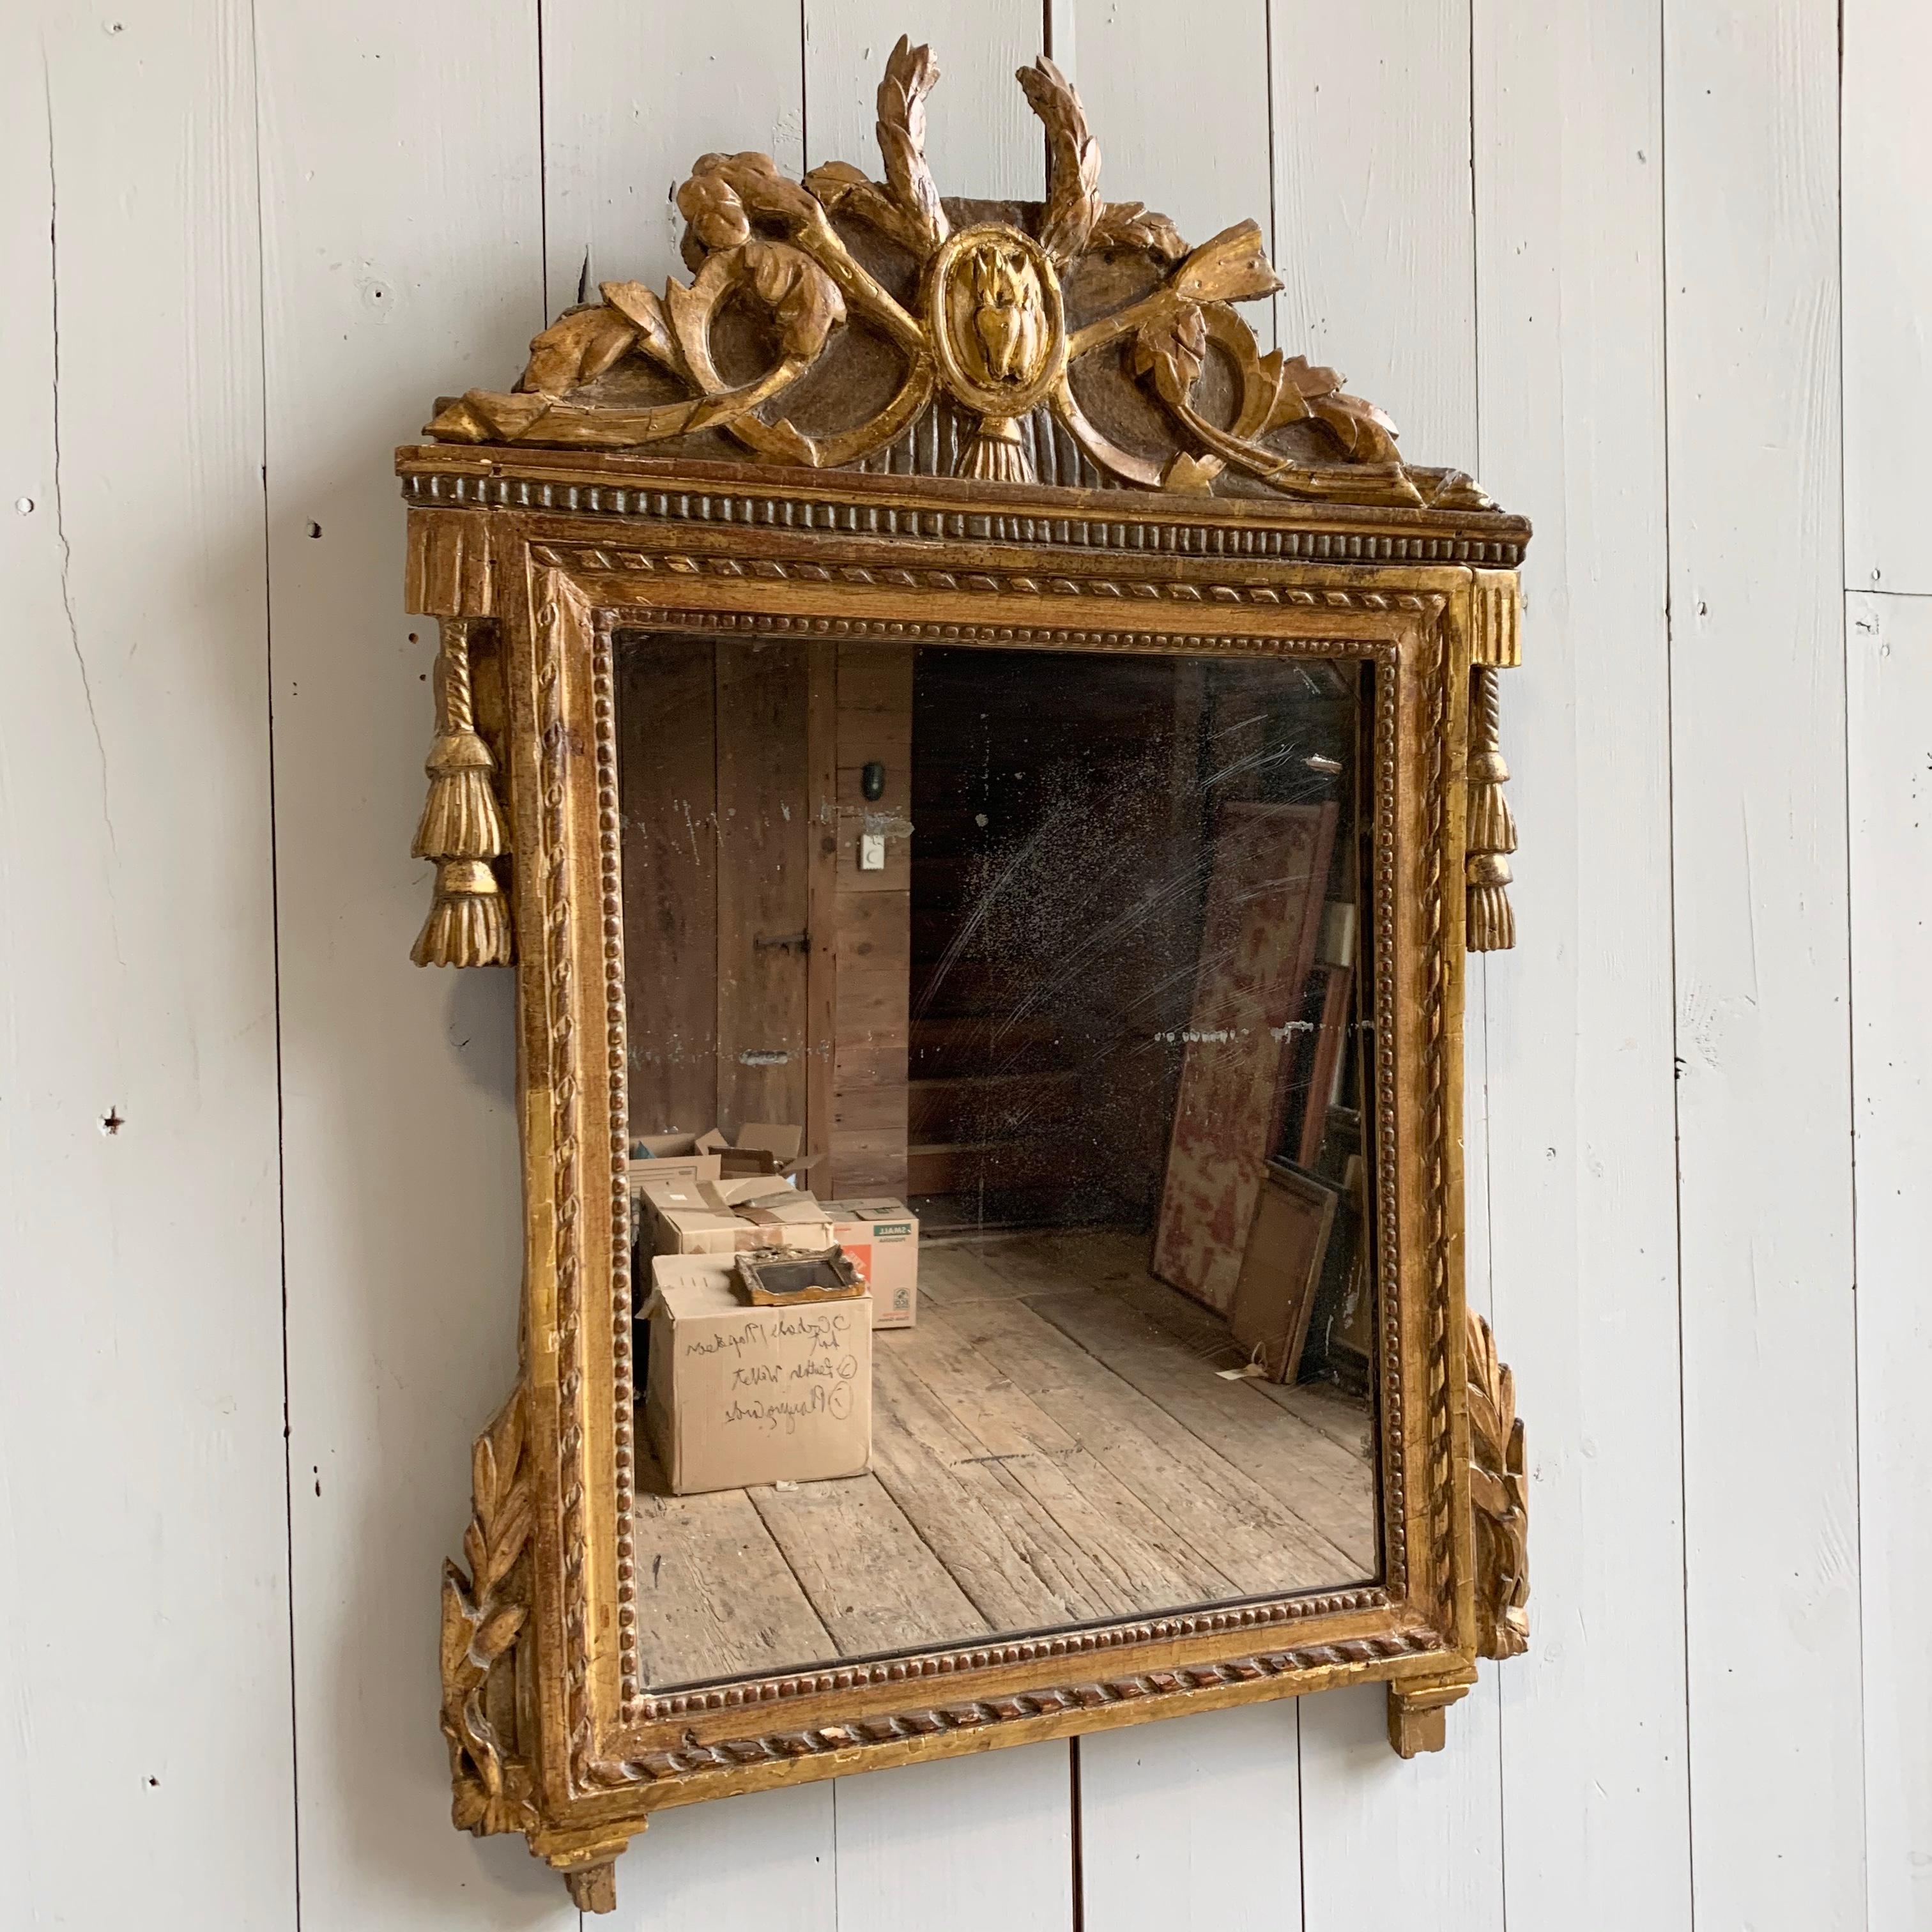 A French Louis XVI period giltwood wall mirror with upper crest and other carved decoration including tassels, garlands, etc. Original mercury plate glass mirror, circa 1790.